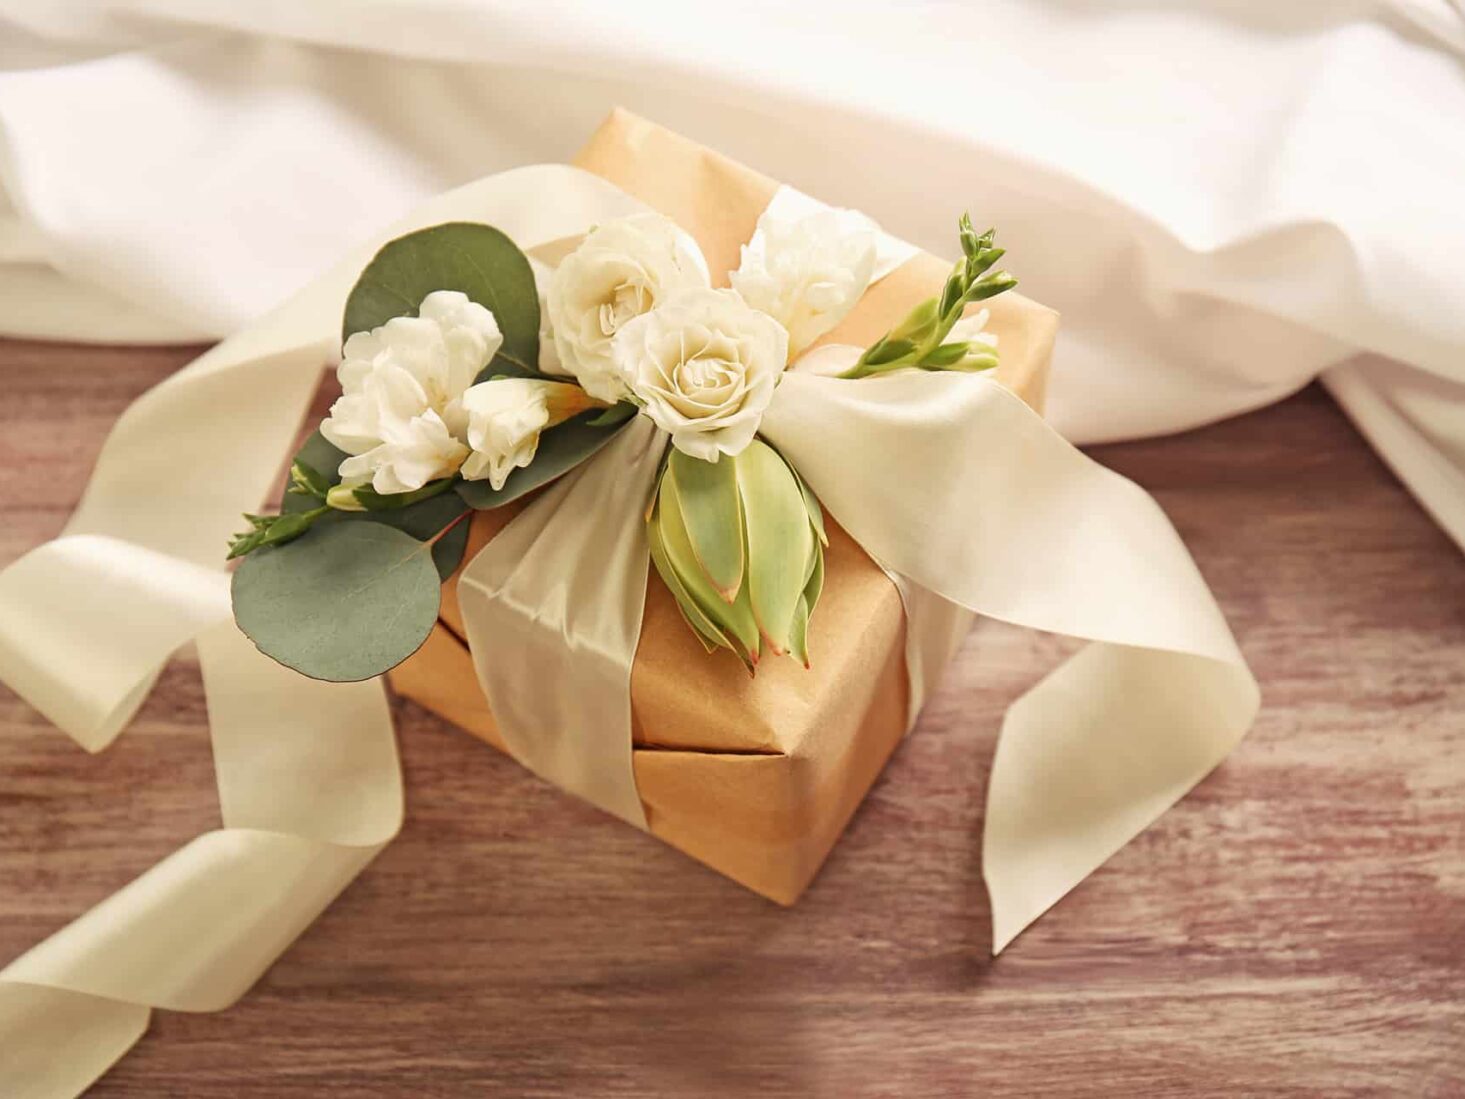 10 Best Wedding Return Gifts Ideas for Guests | Indian Marriage Return Gifts